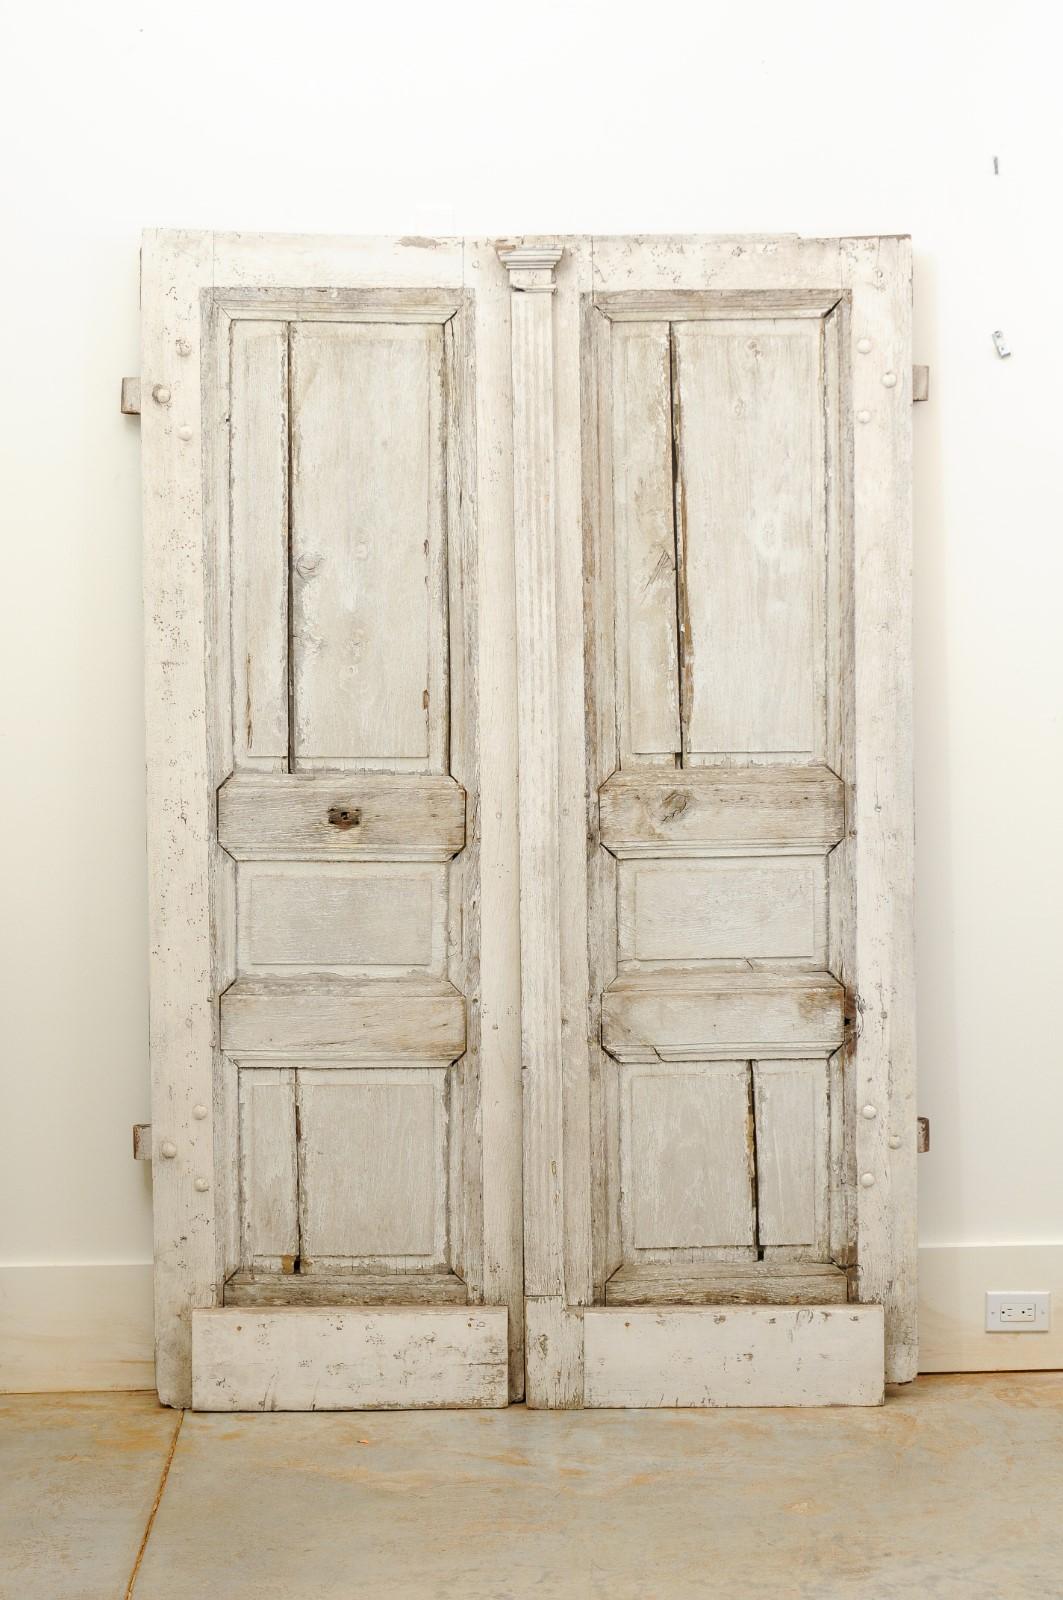 French painted oak double doors from the 18th century, with Doric pilaster, recessed panels and nicely weathered appearance. Created in France during the 18th century, these double doors charm us with their clean lines and nicely aged patina.